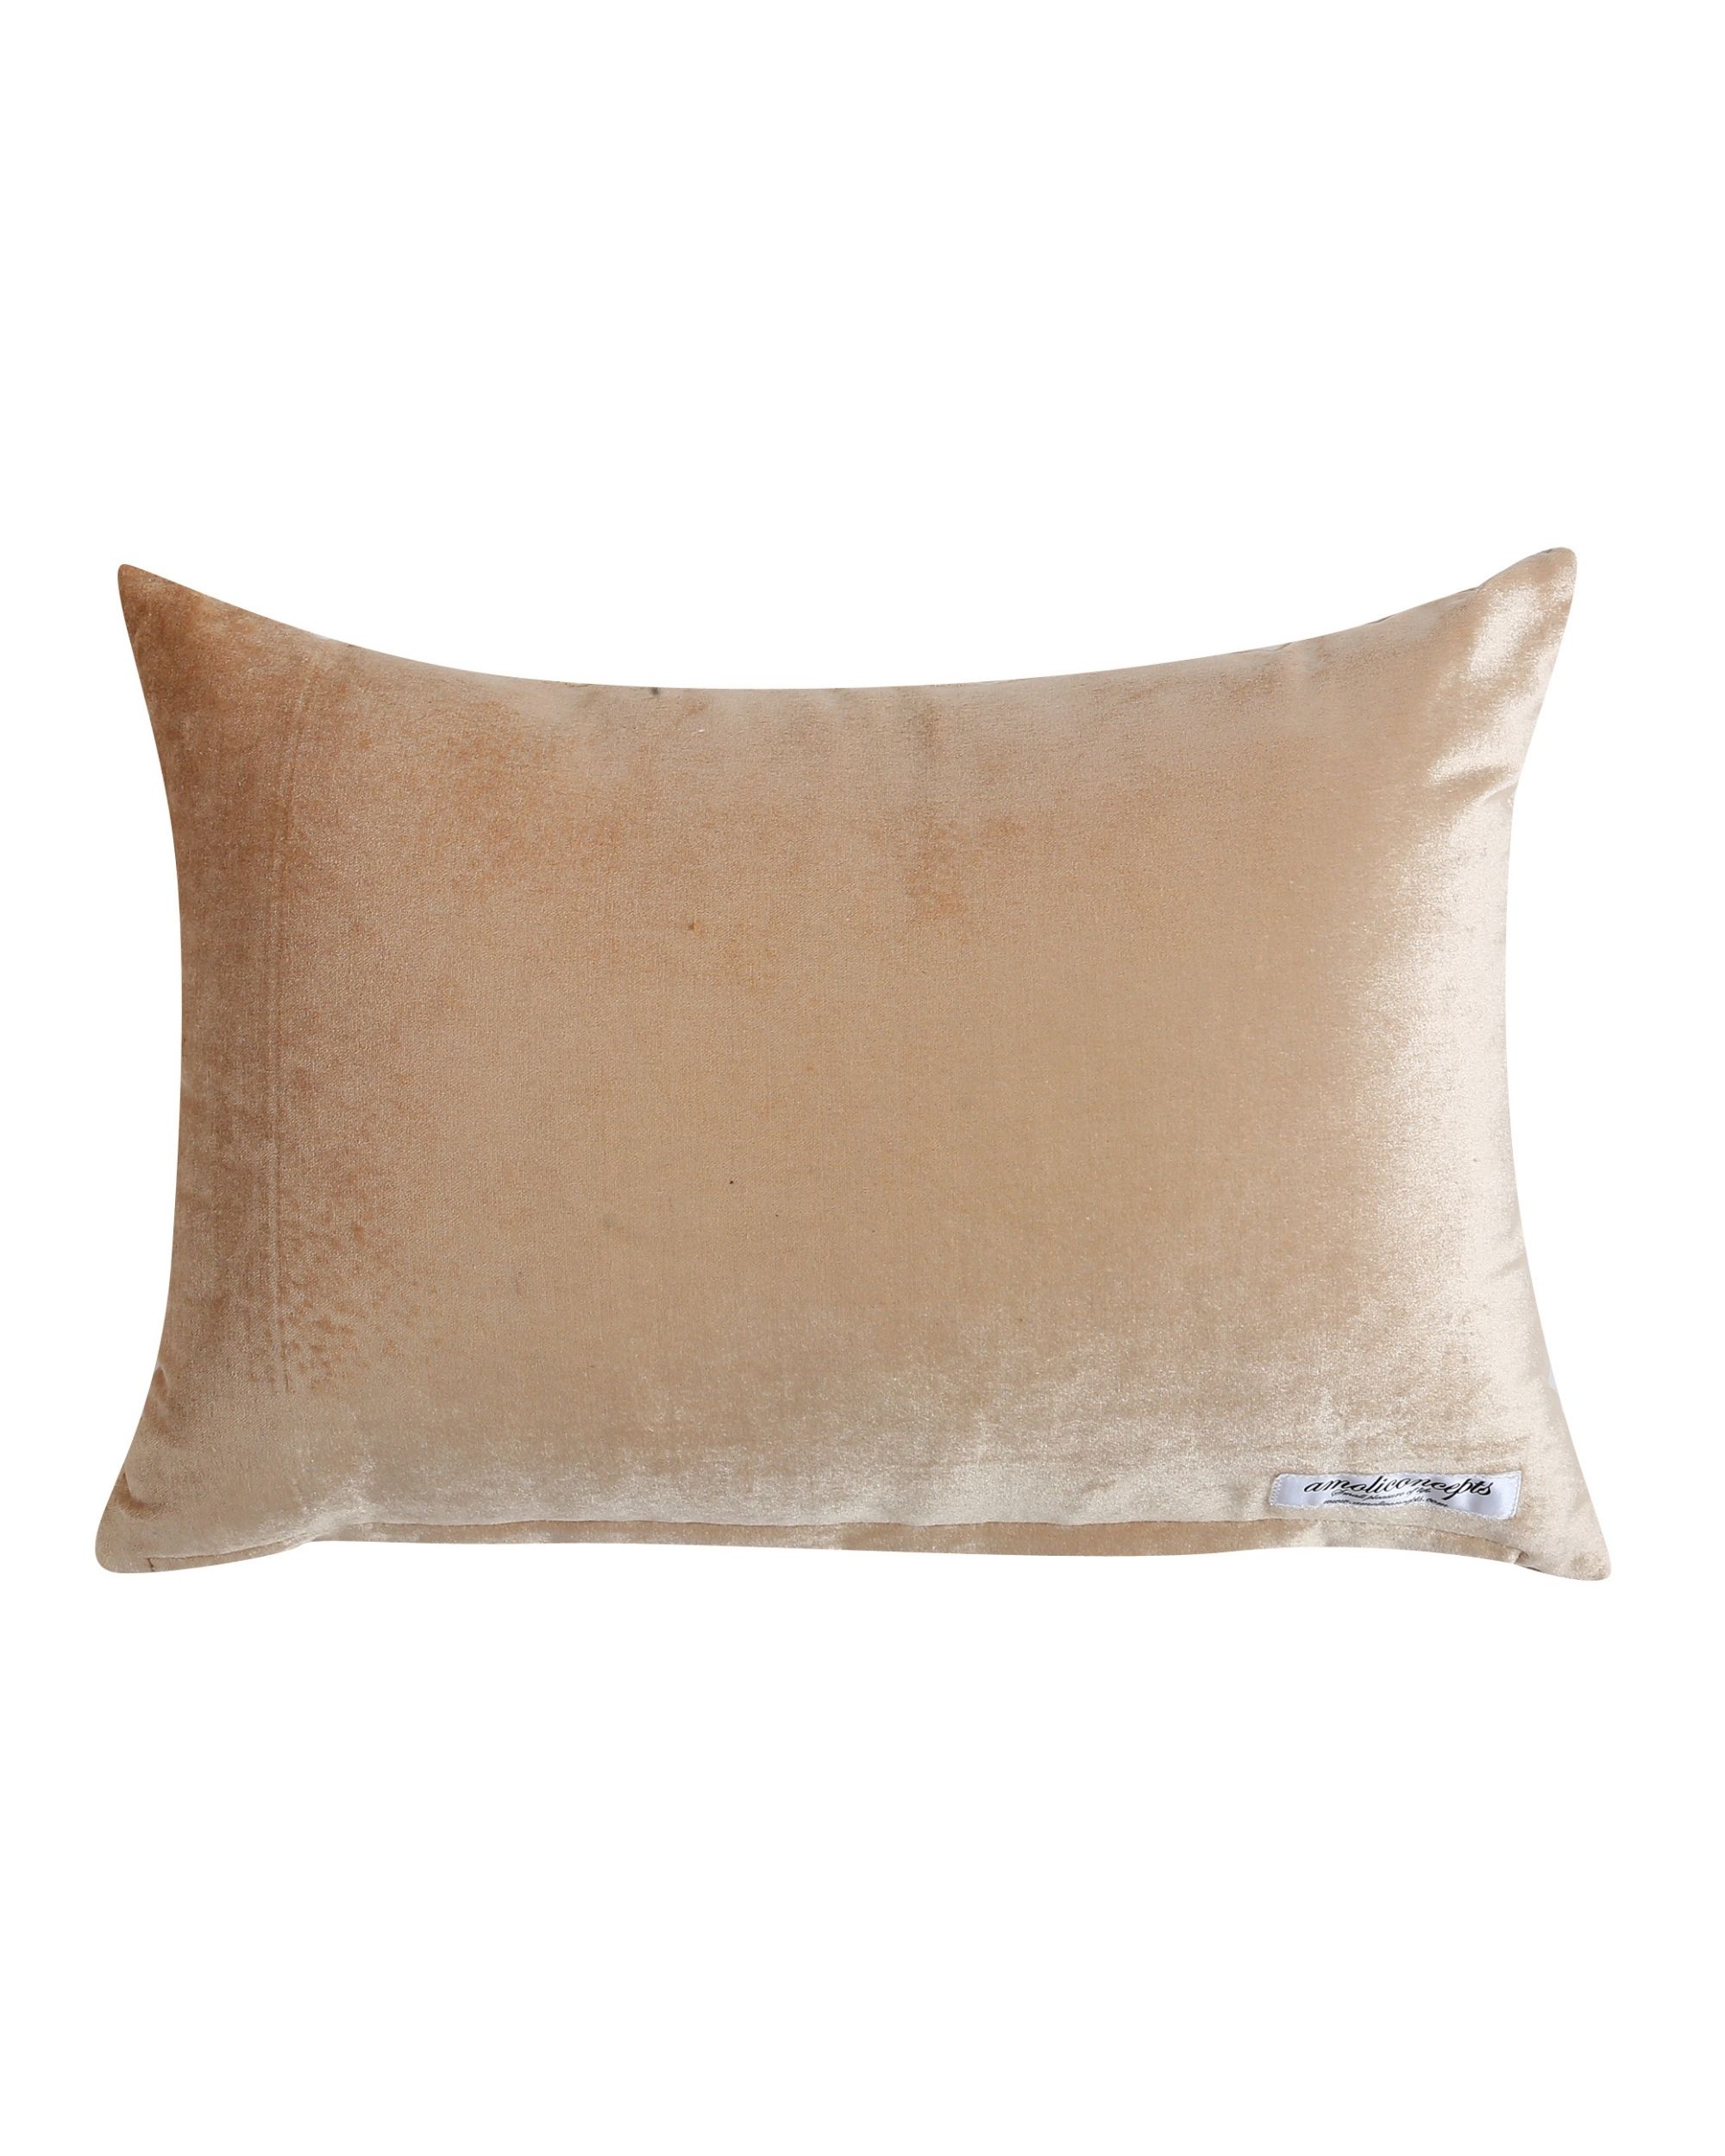 Beige and white sequined beaded cushion cover by Amoliconcepts | The ...